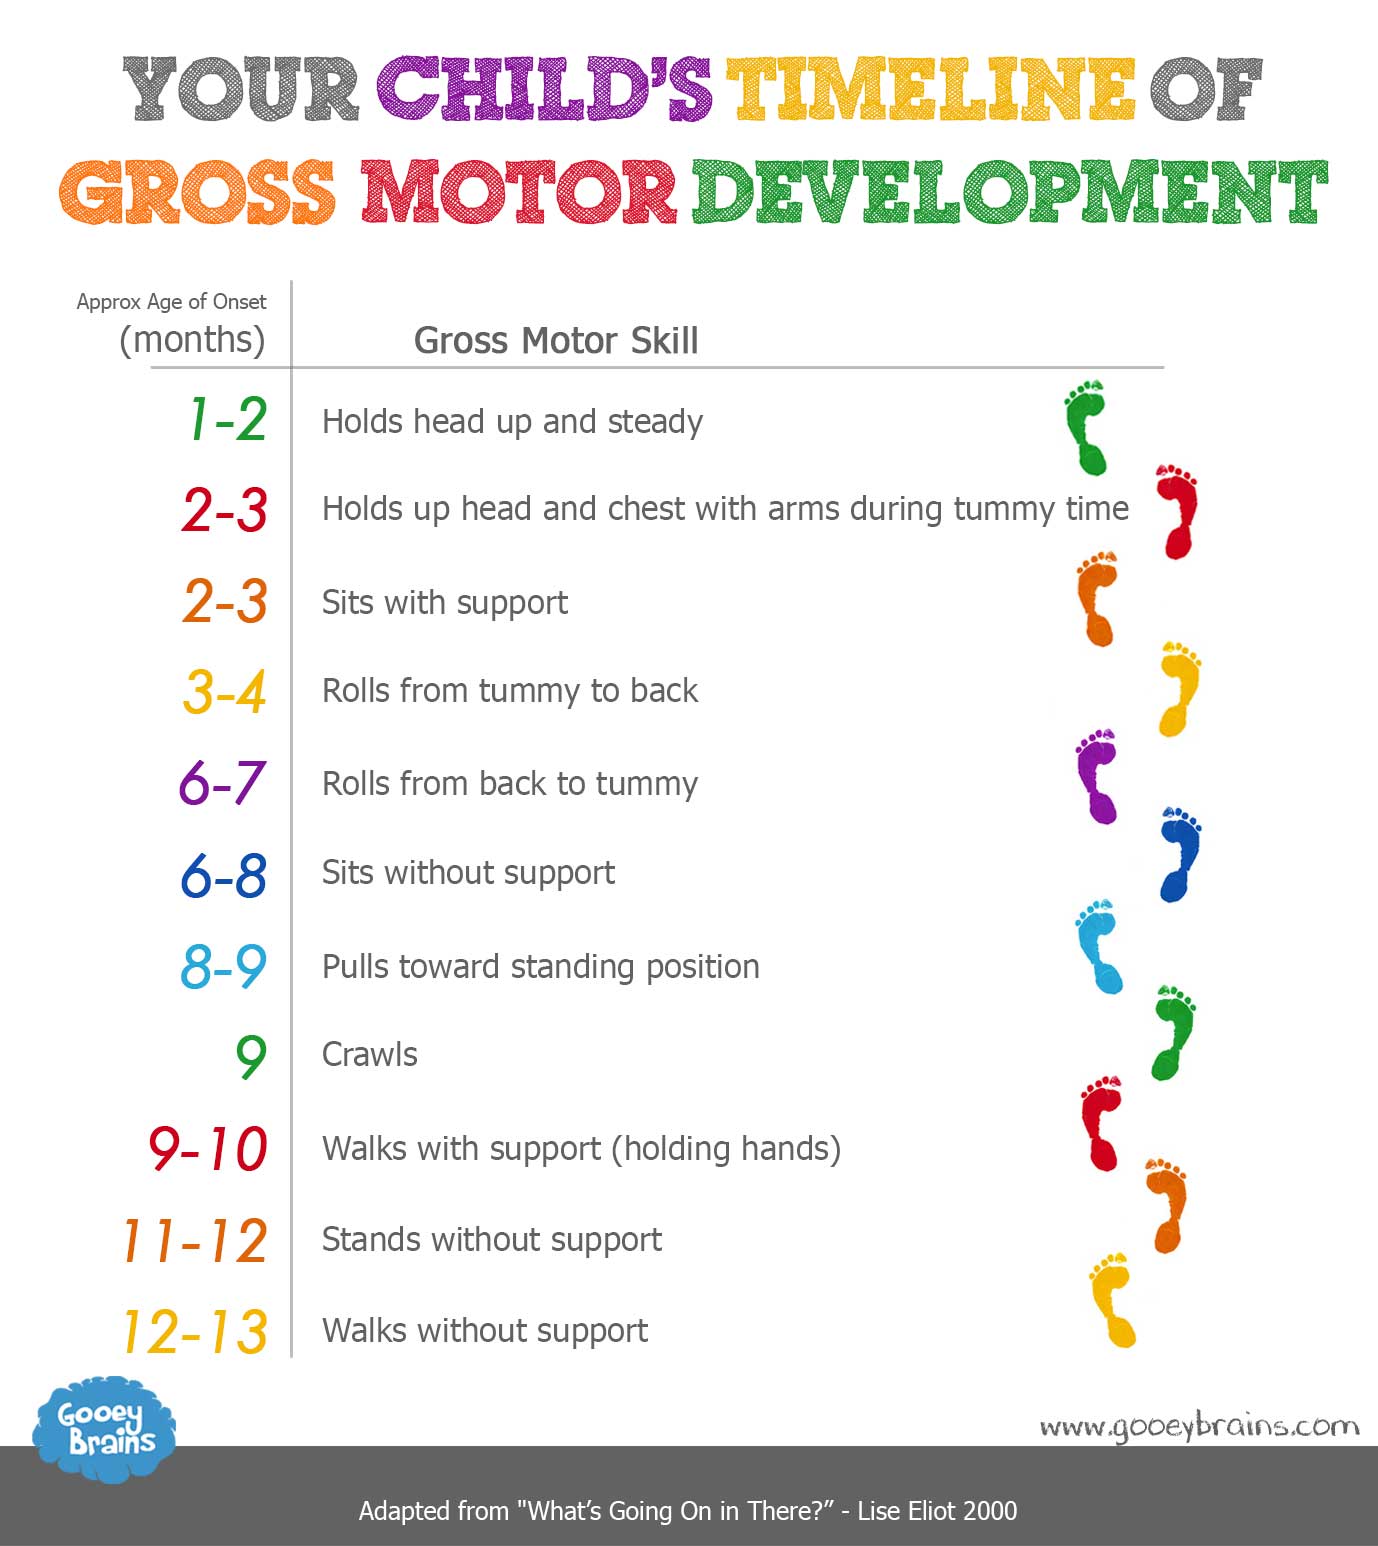 Child Development | Motor Skills 101 - What to expect and when!